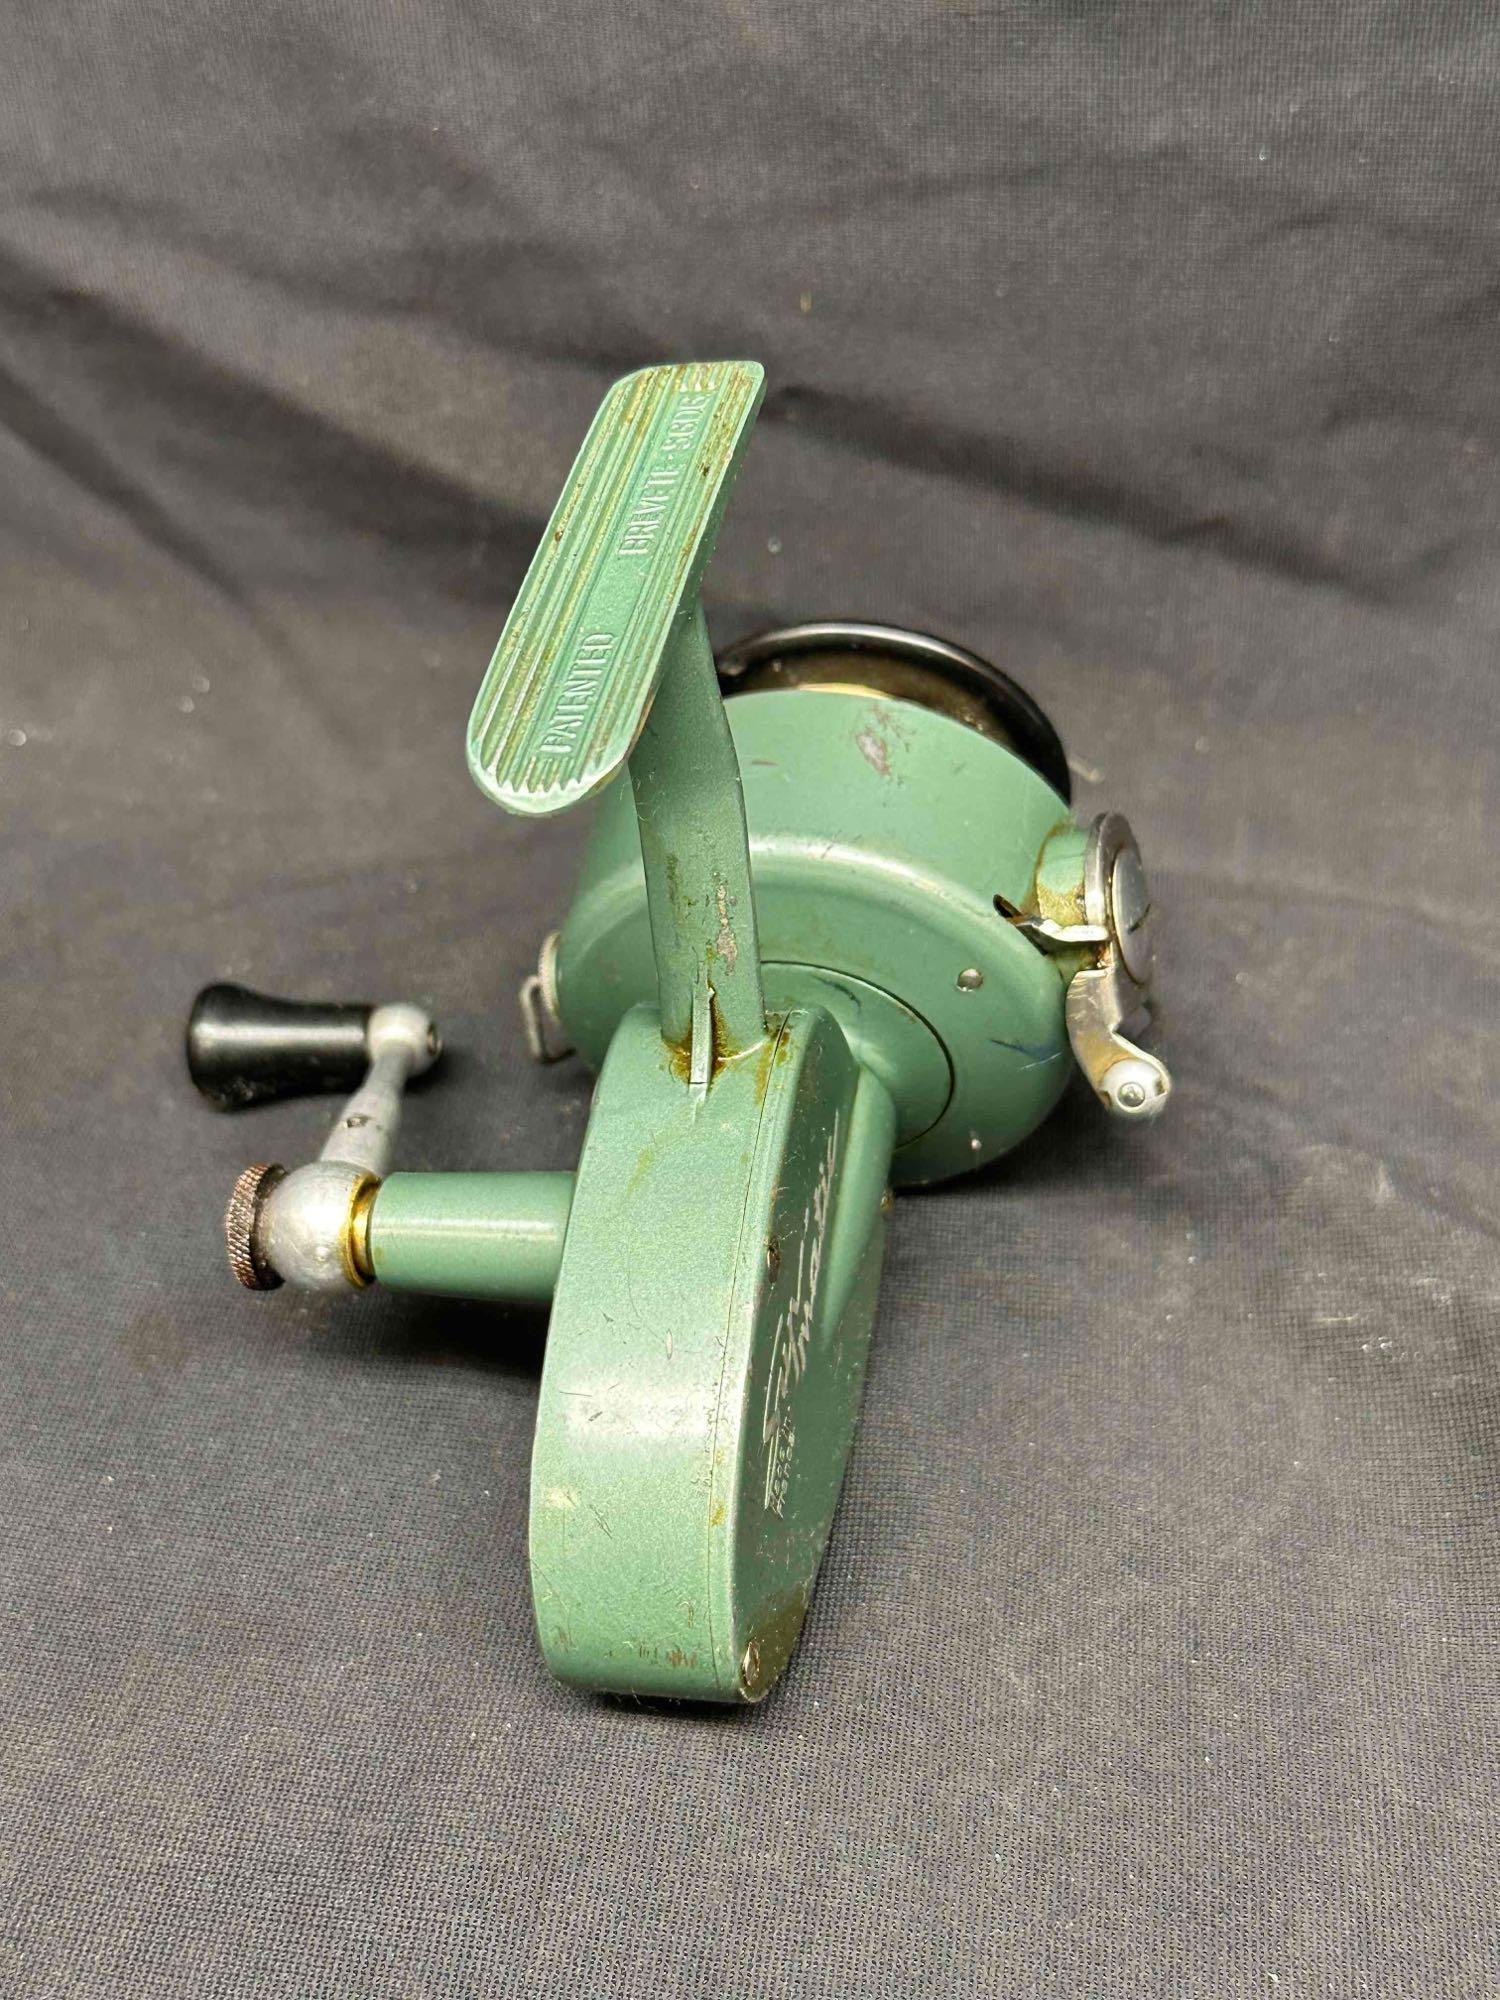 Sold at Auction: (6) Assorted Fishing Reels.